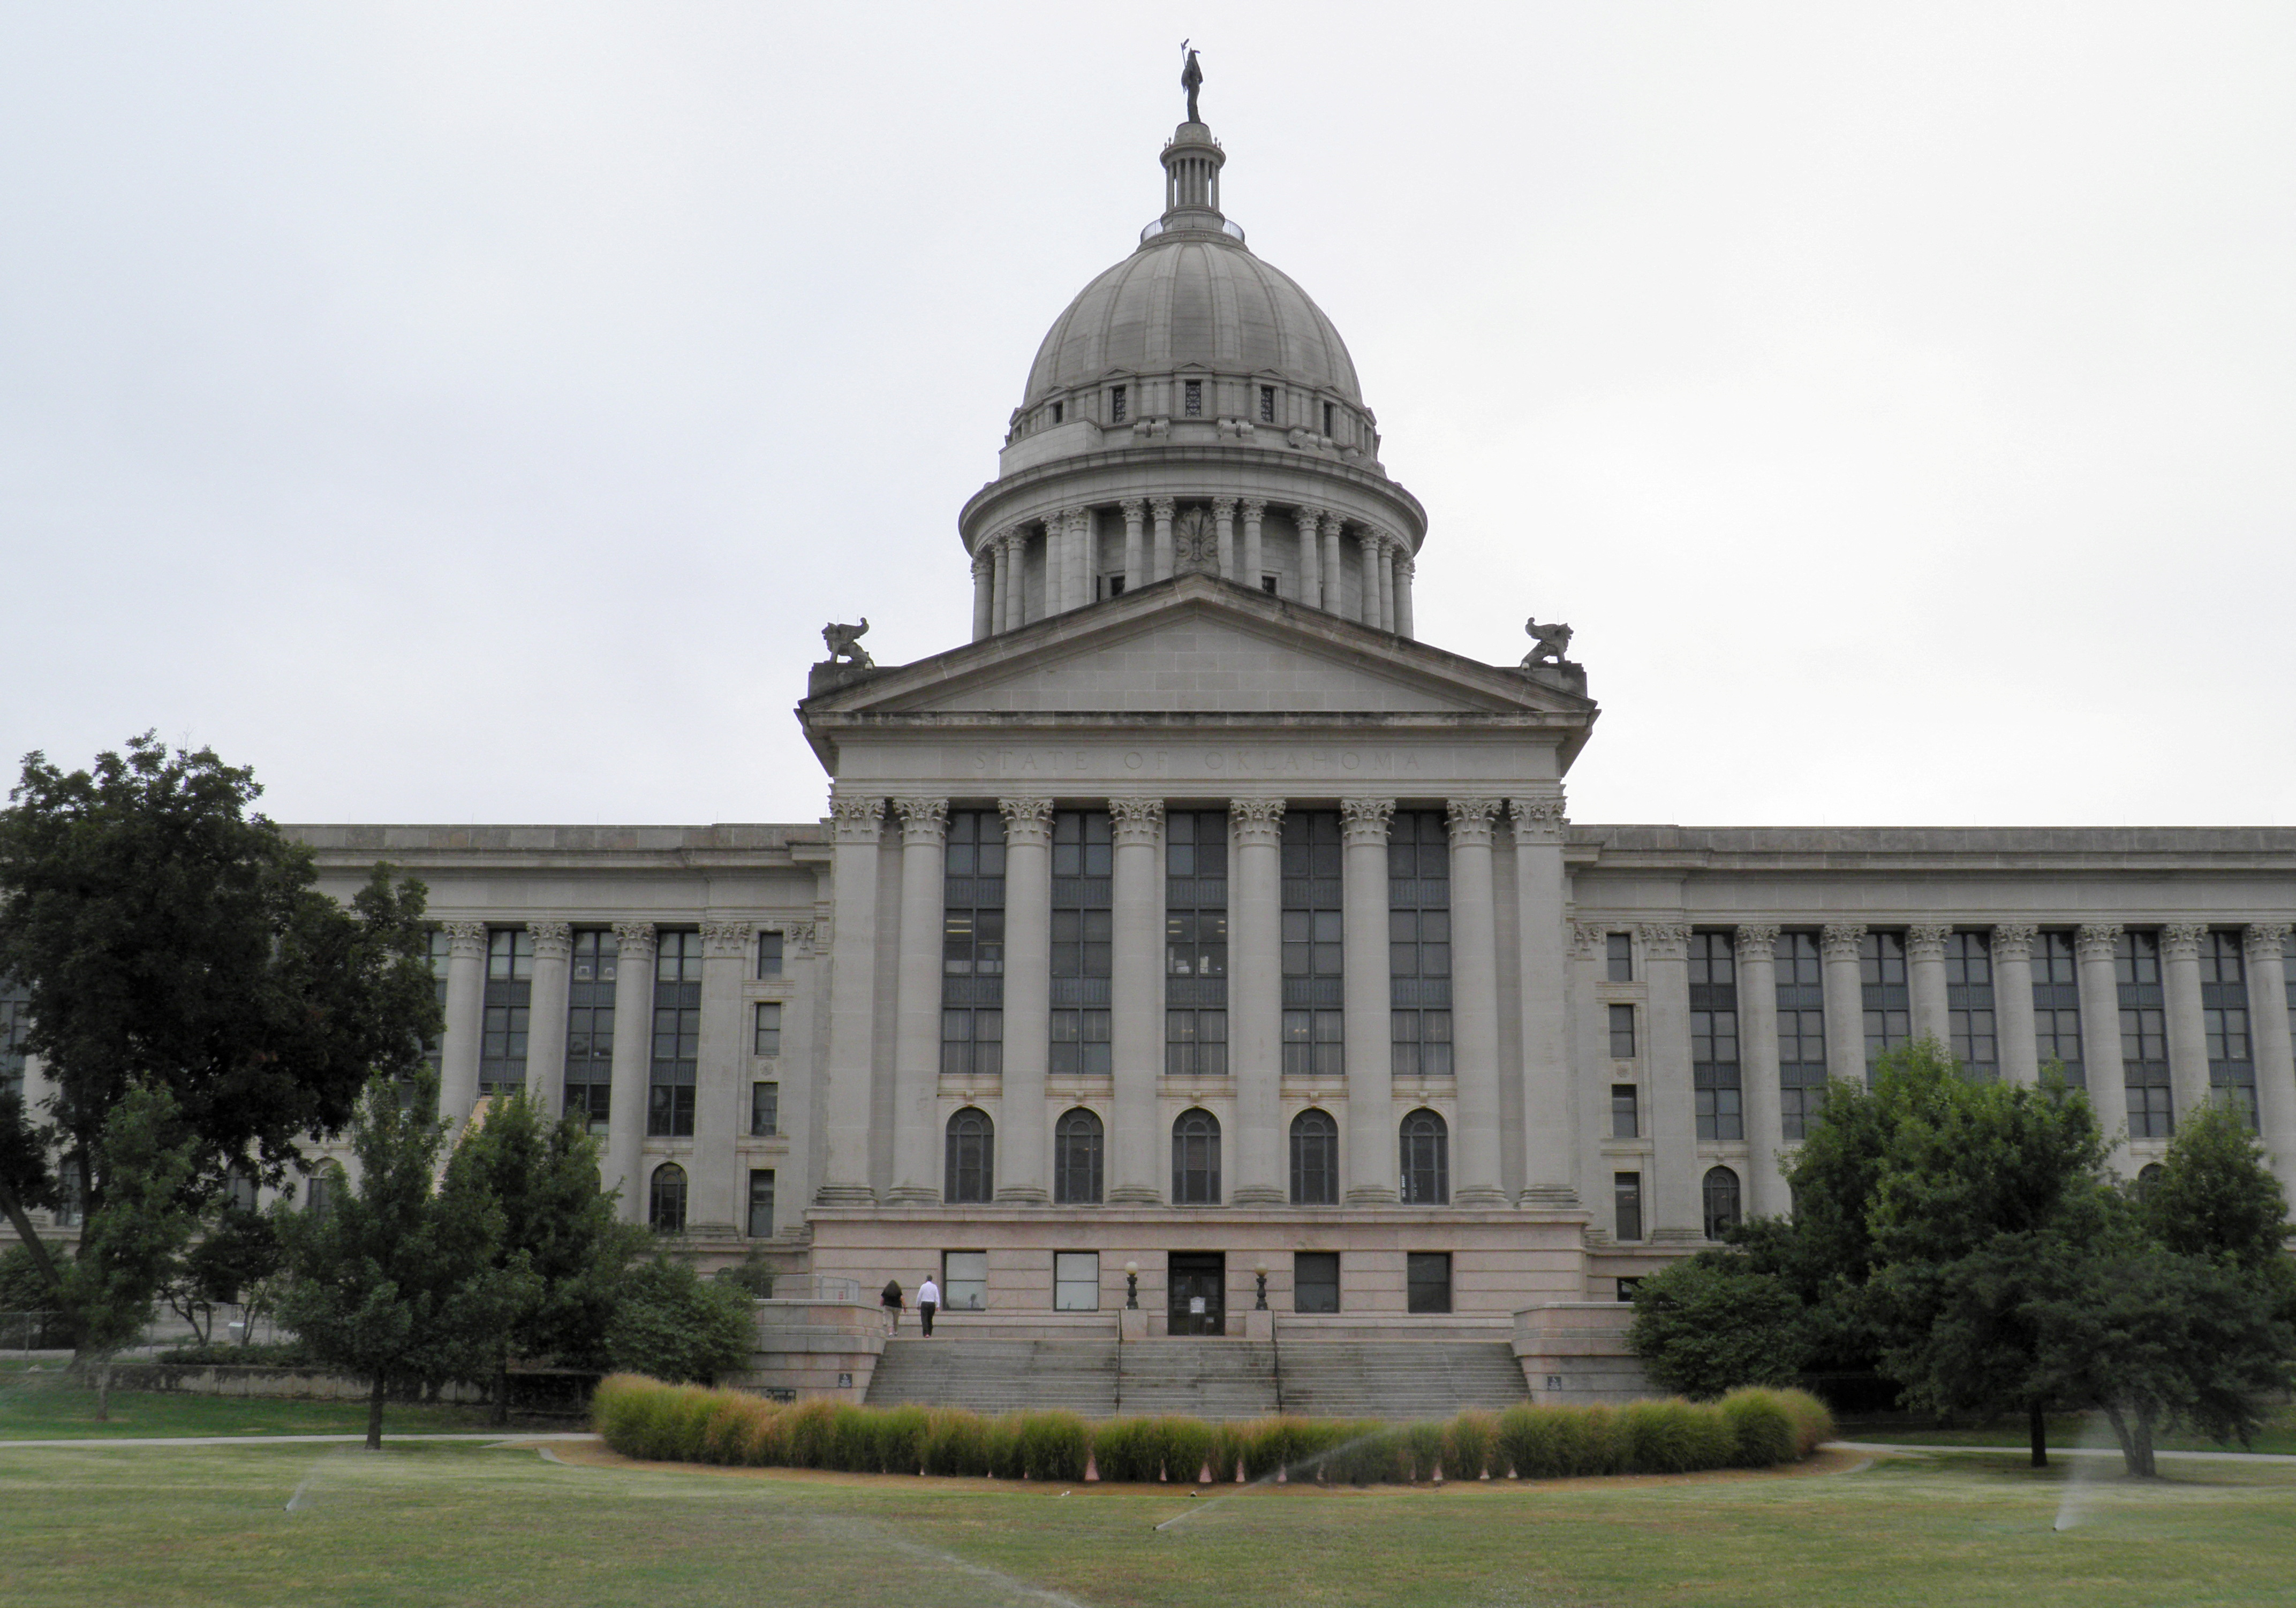 The Oklahoma State Capitol is seen in Oklahoma City